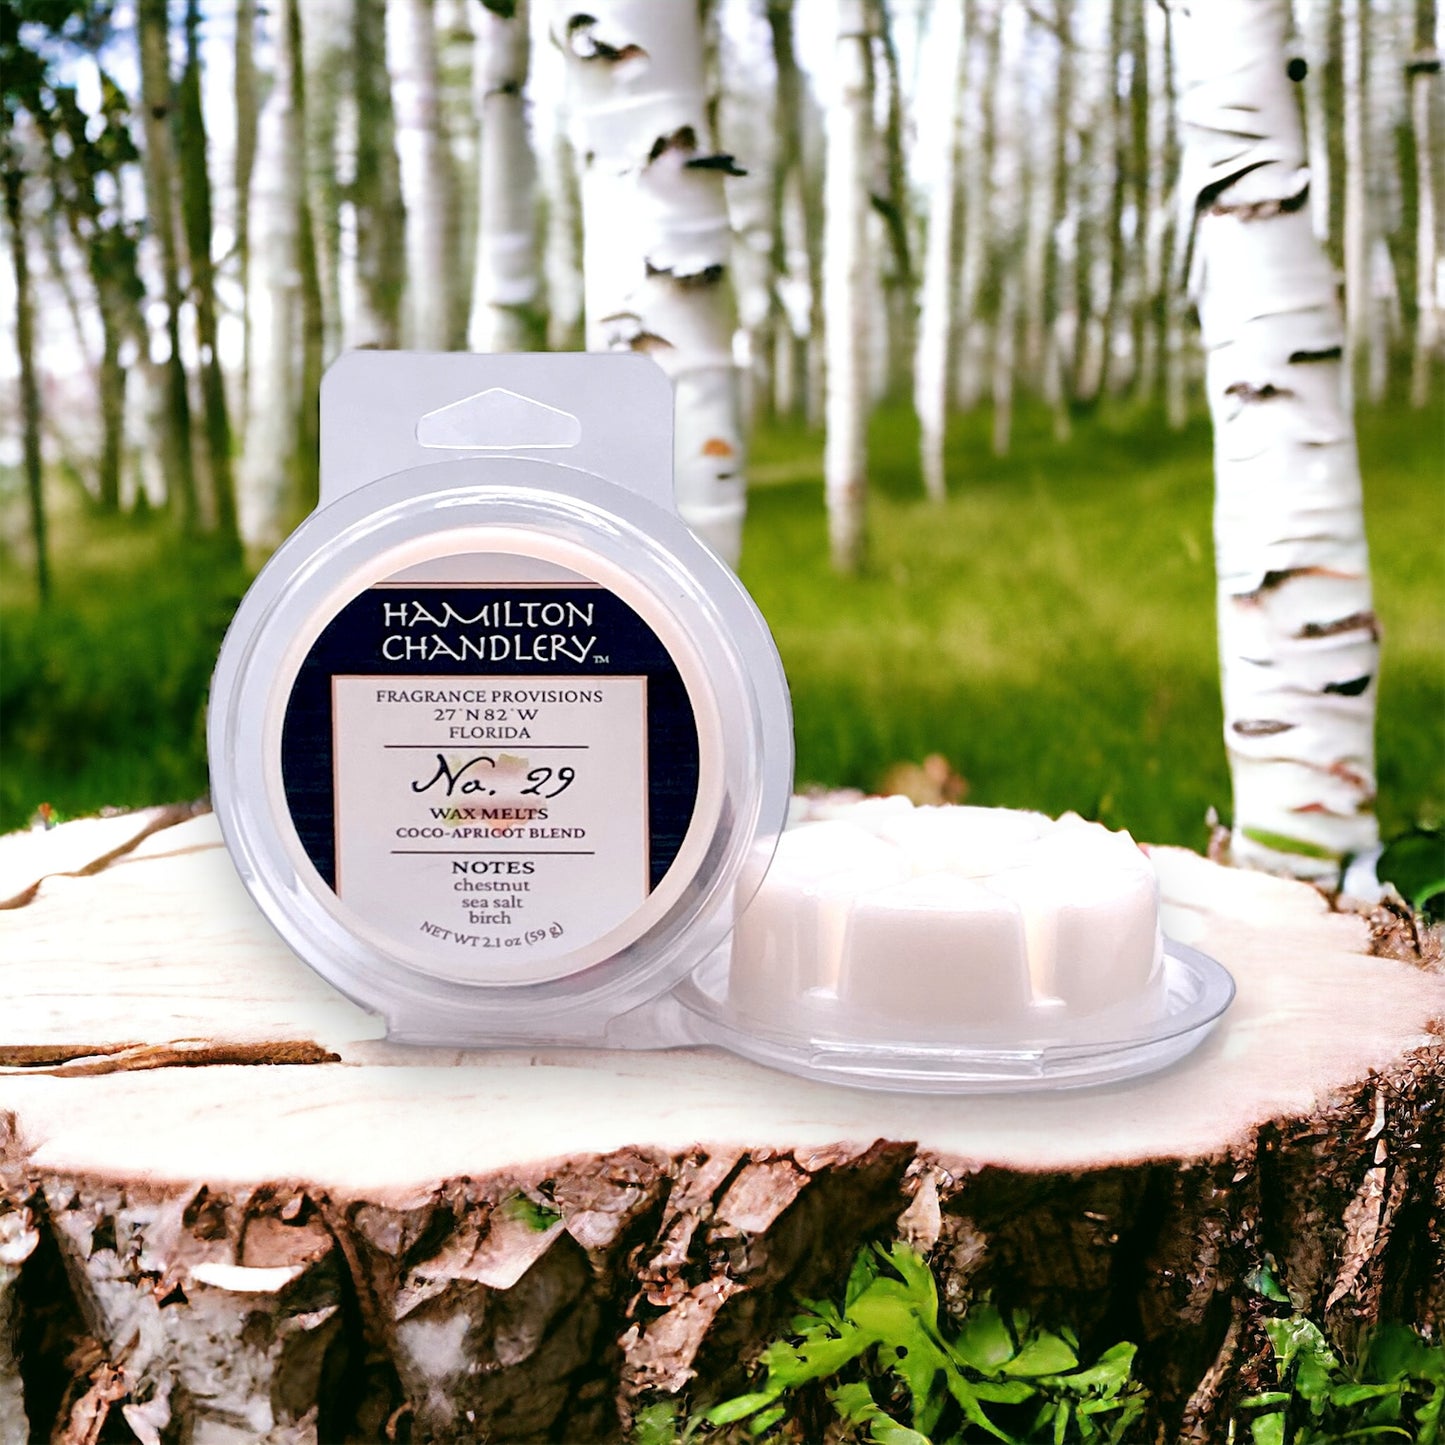 Fragrance No. 29 Wax Melts on Stump with Birch Trees in Background | Hamilton Chandlery